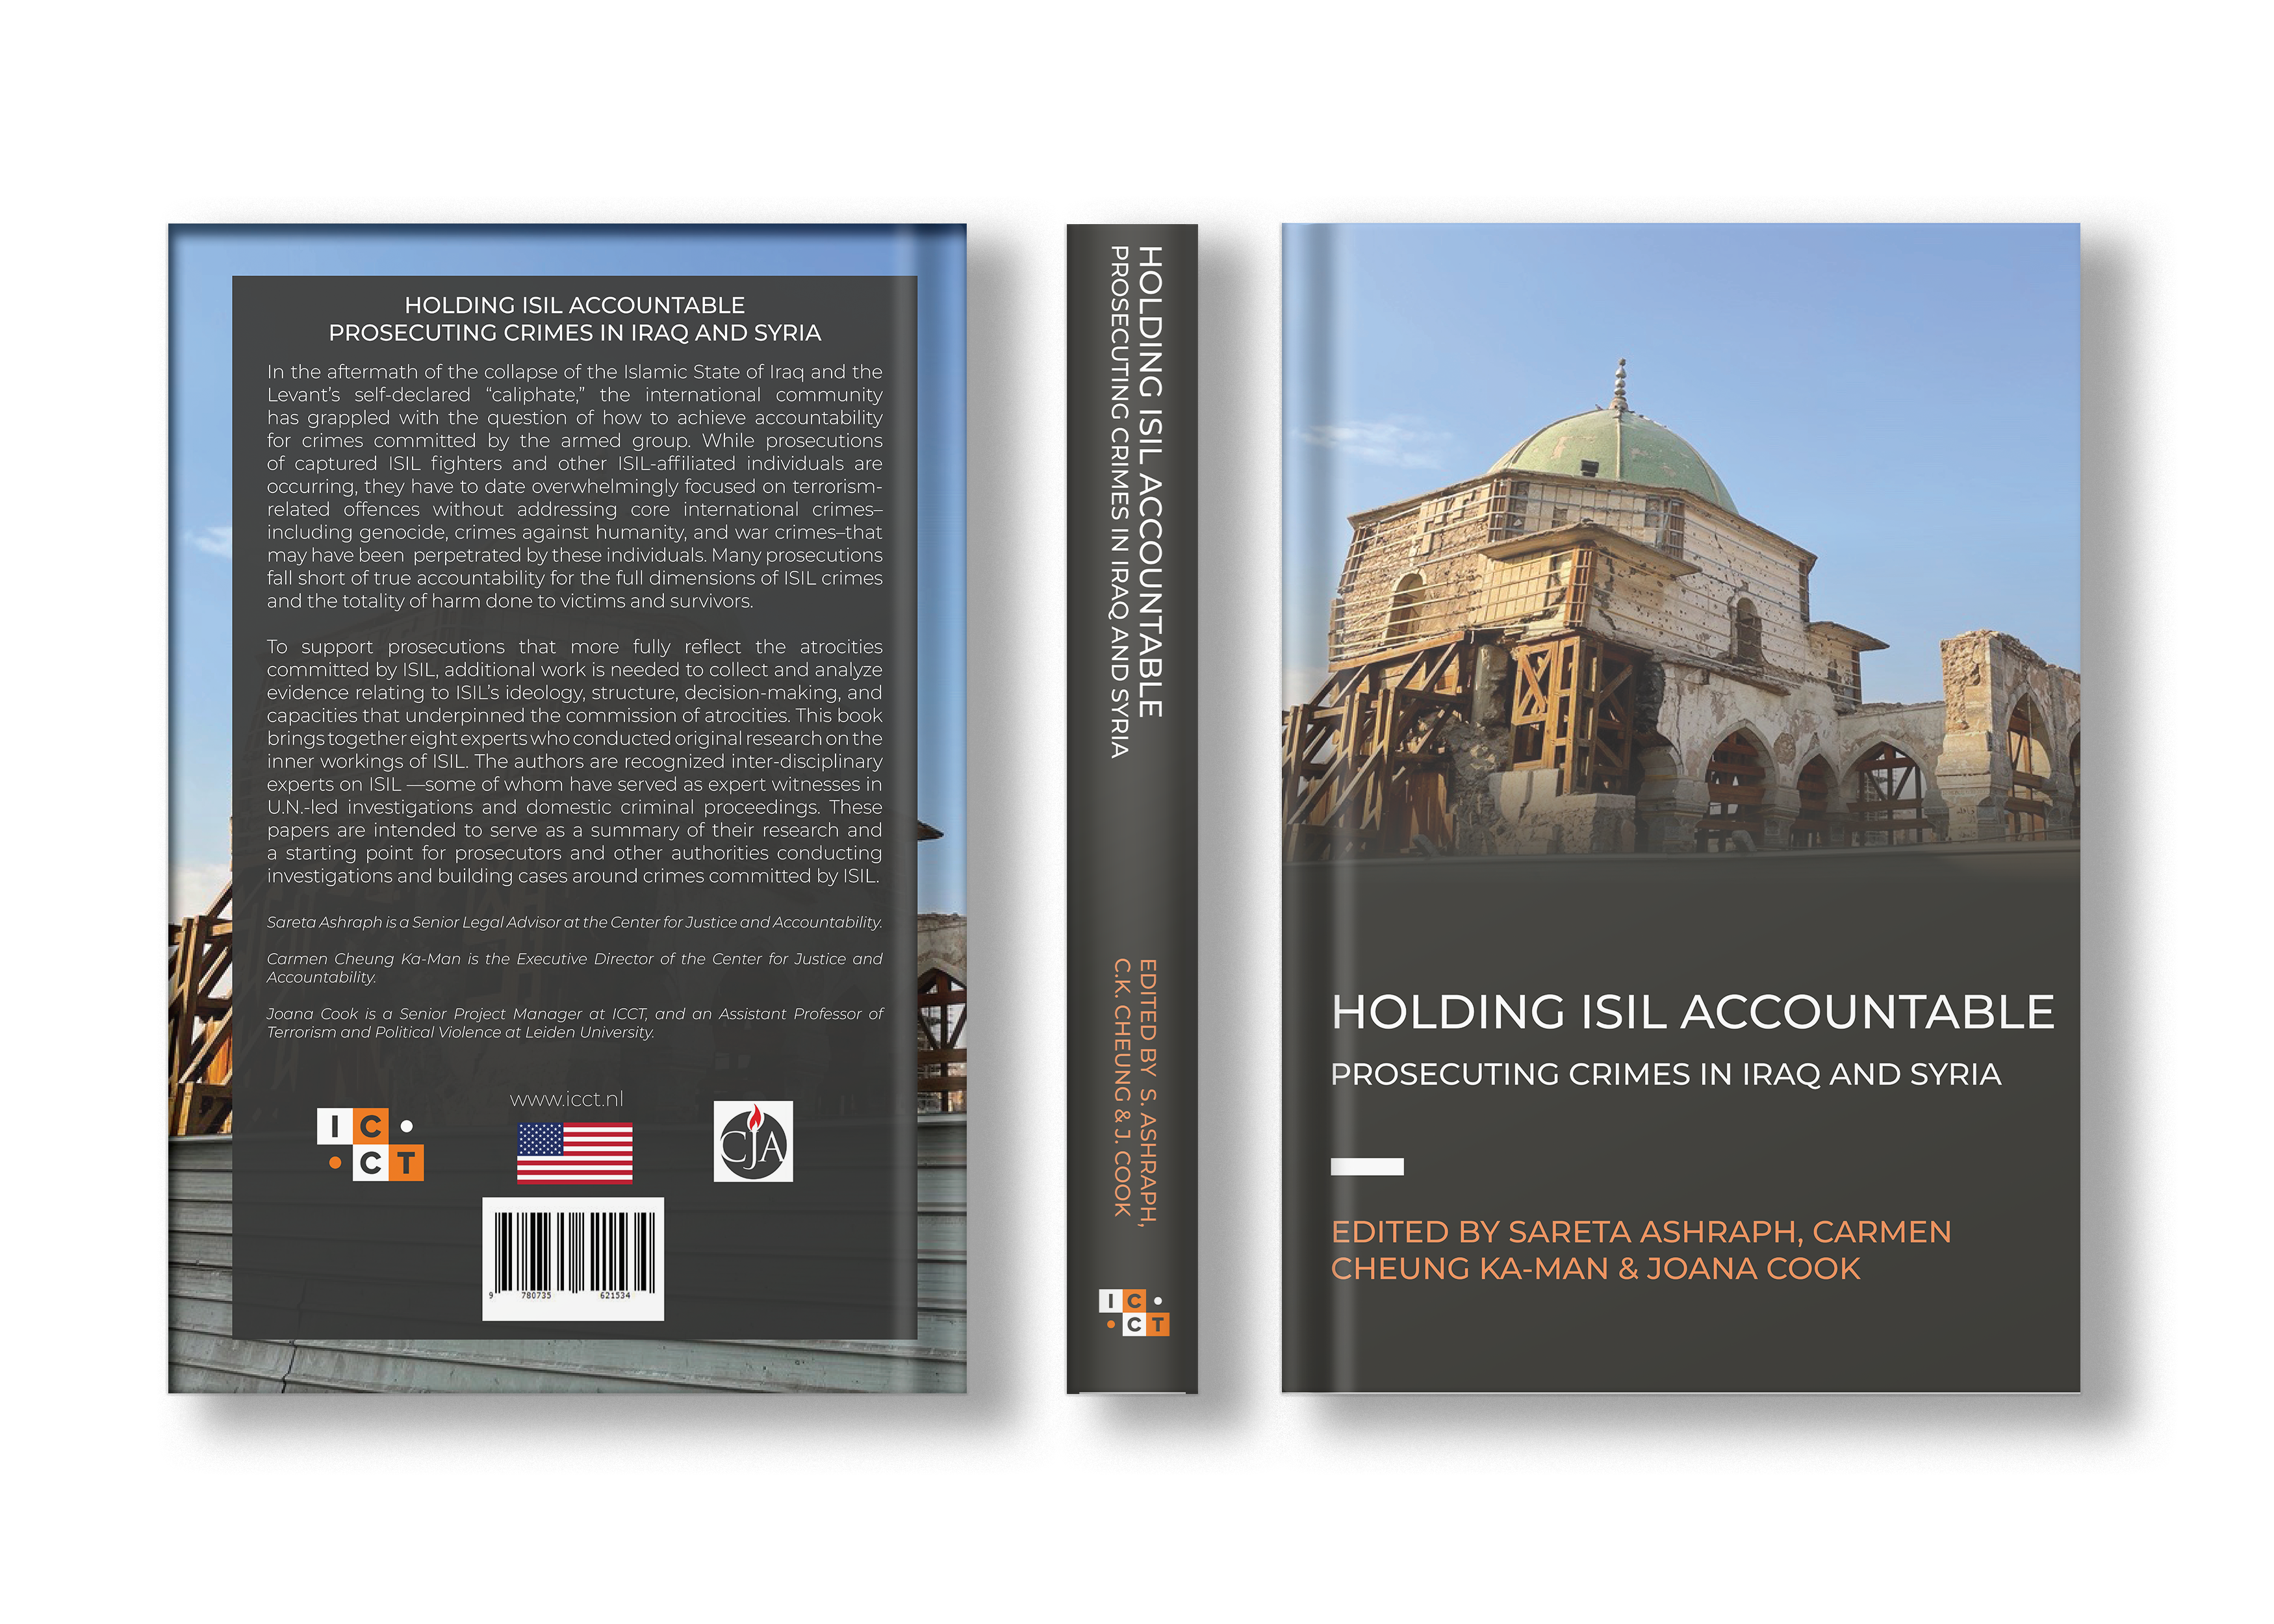 ISIL Accountable